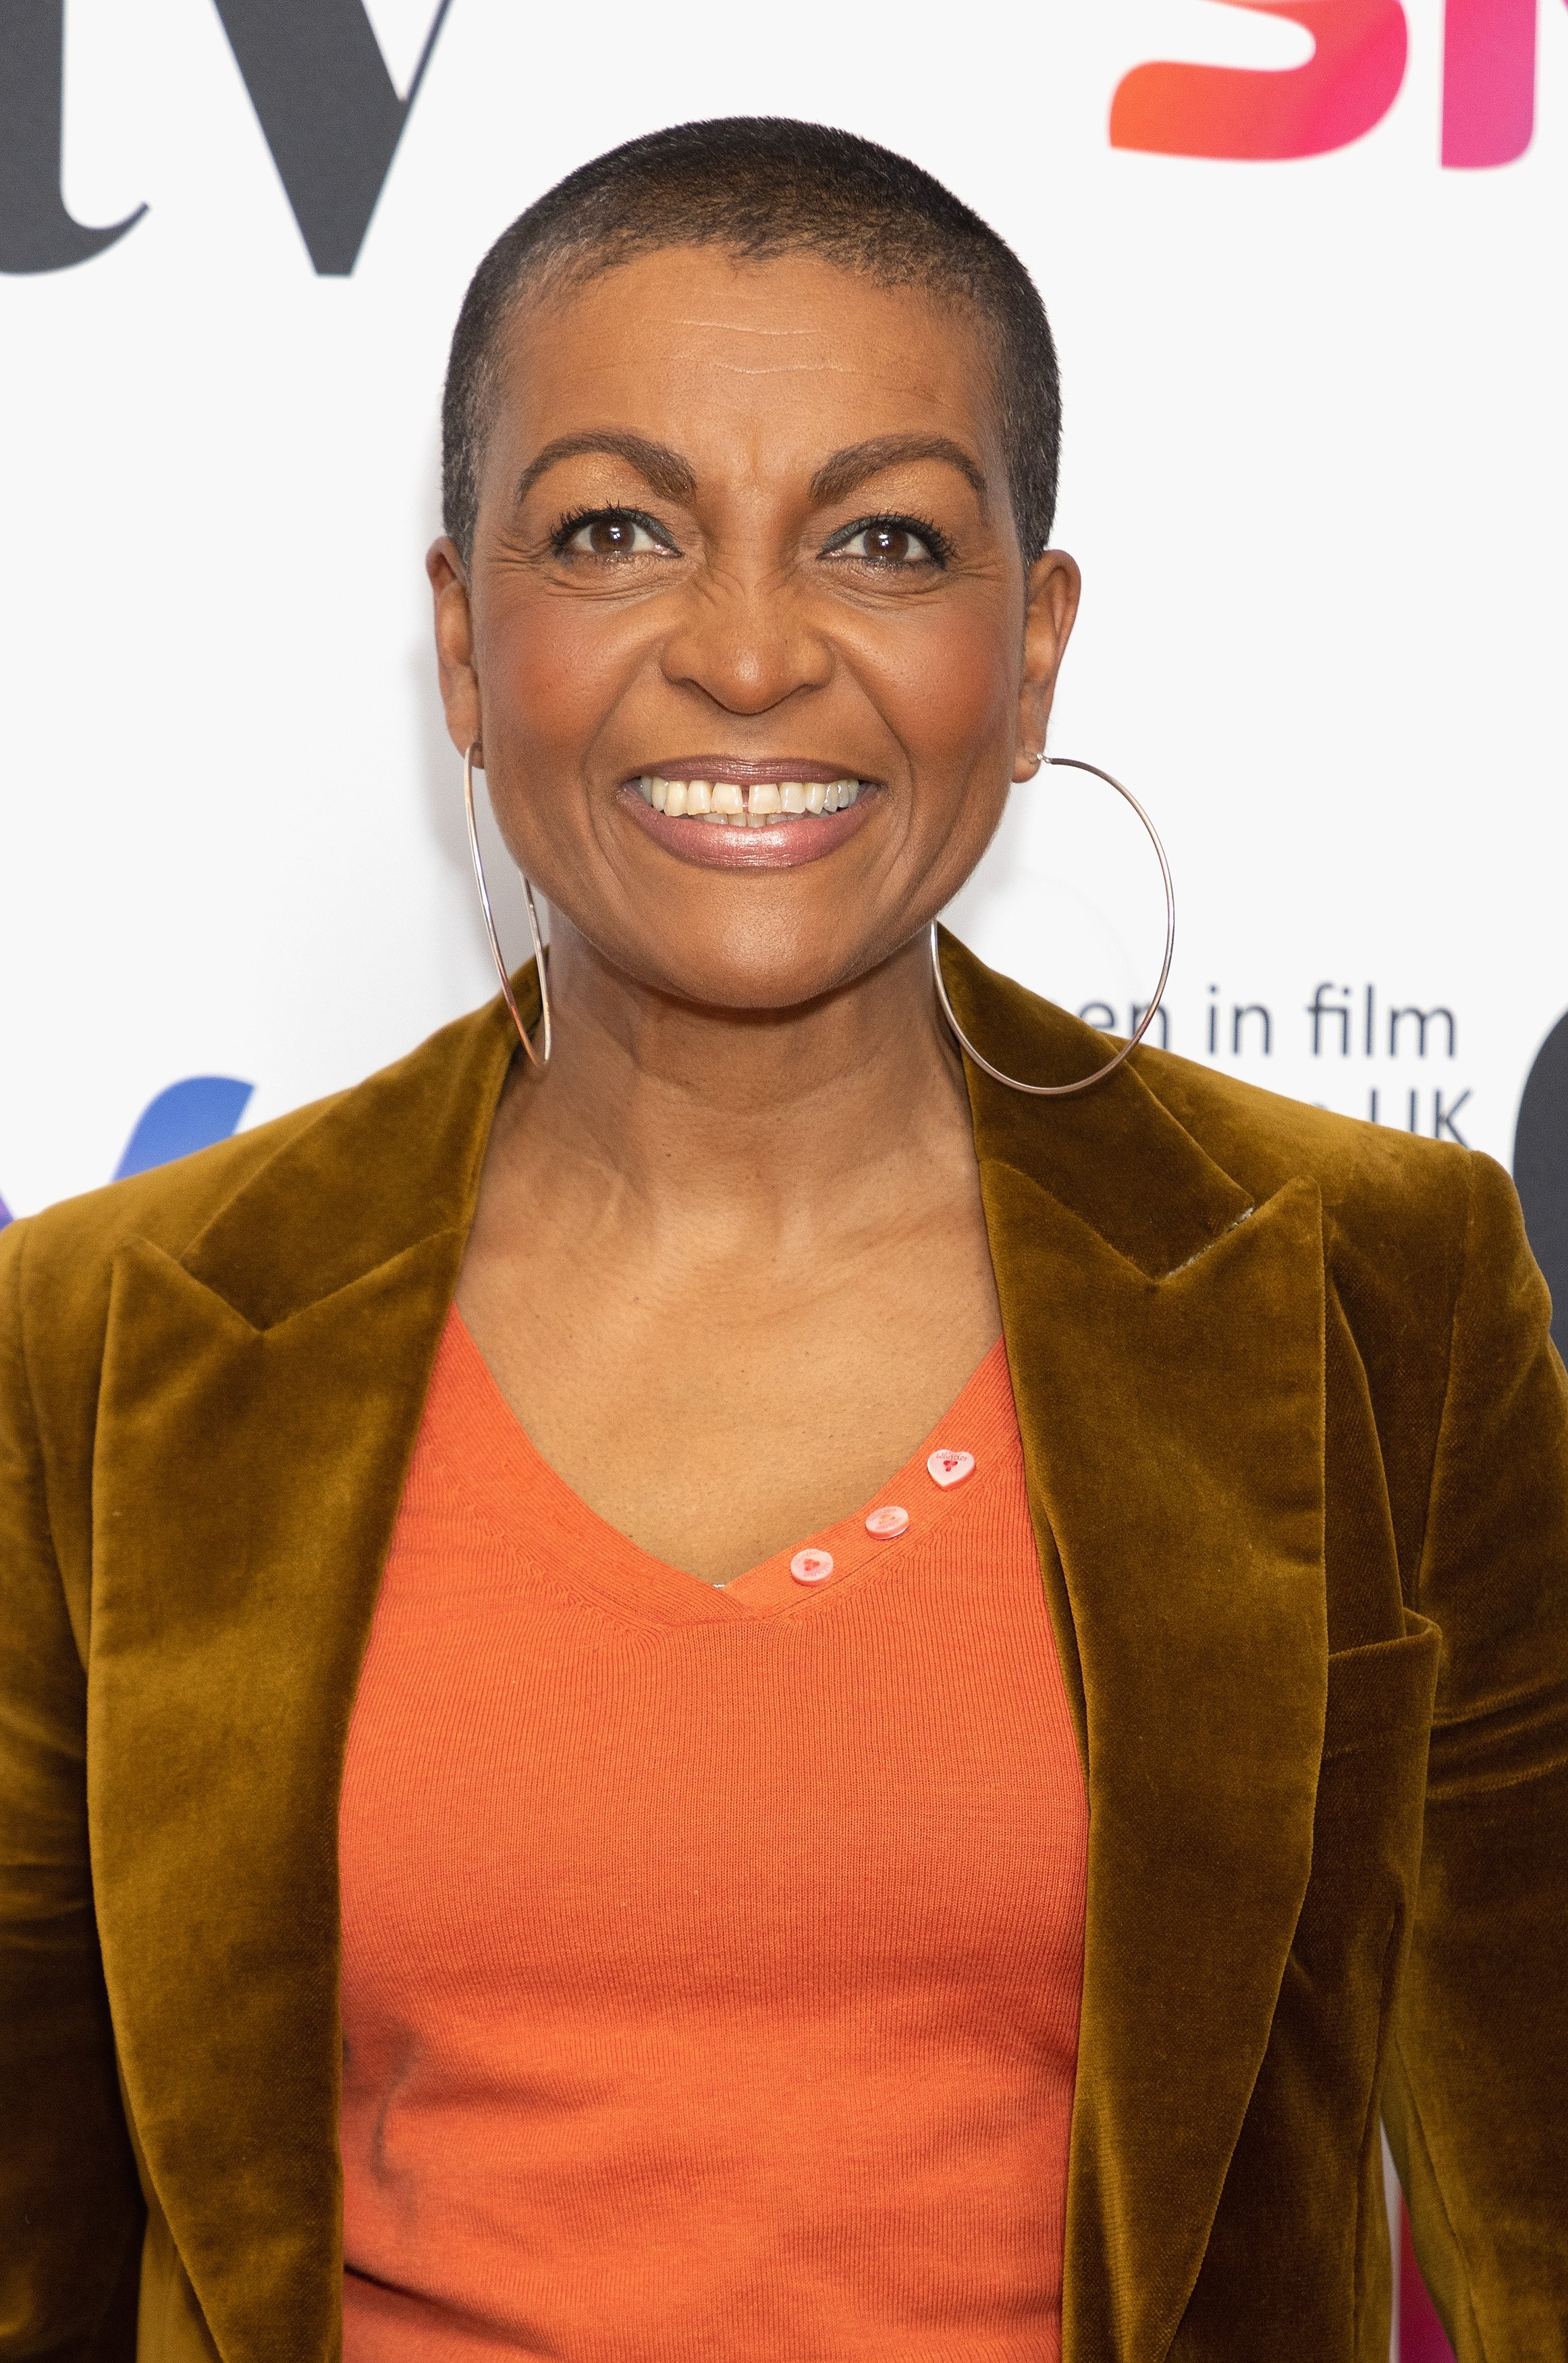 Adjoa Andoh at the "Sky Women In Film And TV Awards" 2022 on December 02, 2022, in London, England. | Source: Getty Images